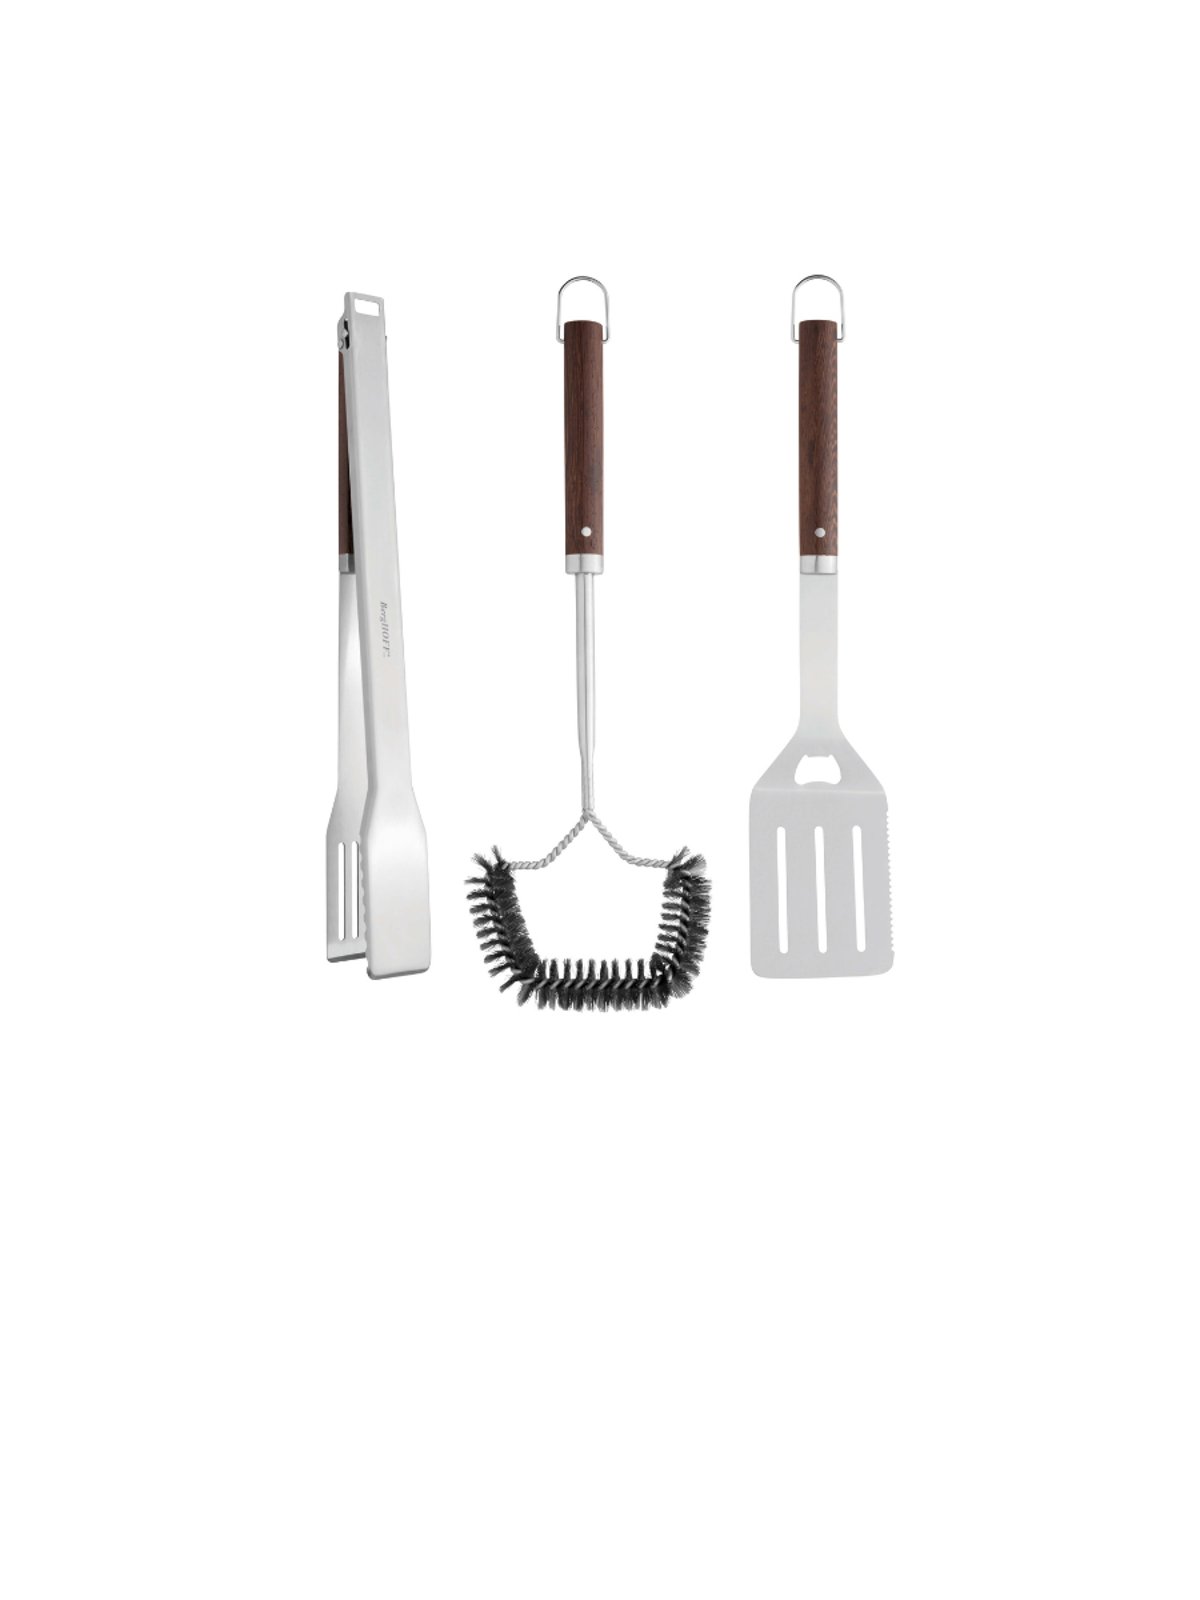 BergHOFF Essentials BBQ Set with Wood Handles Tongs, Spatula and Brush